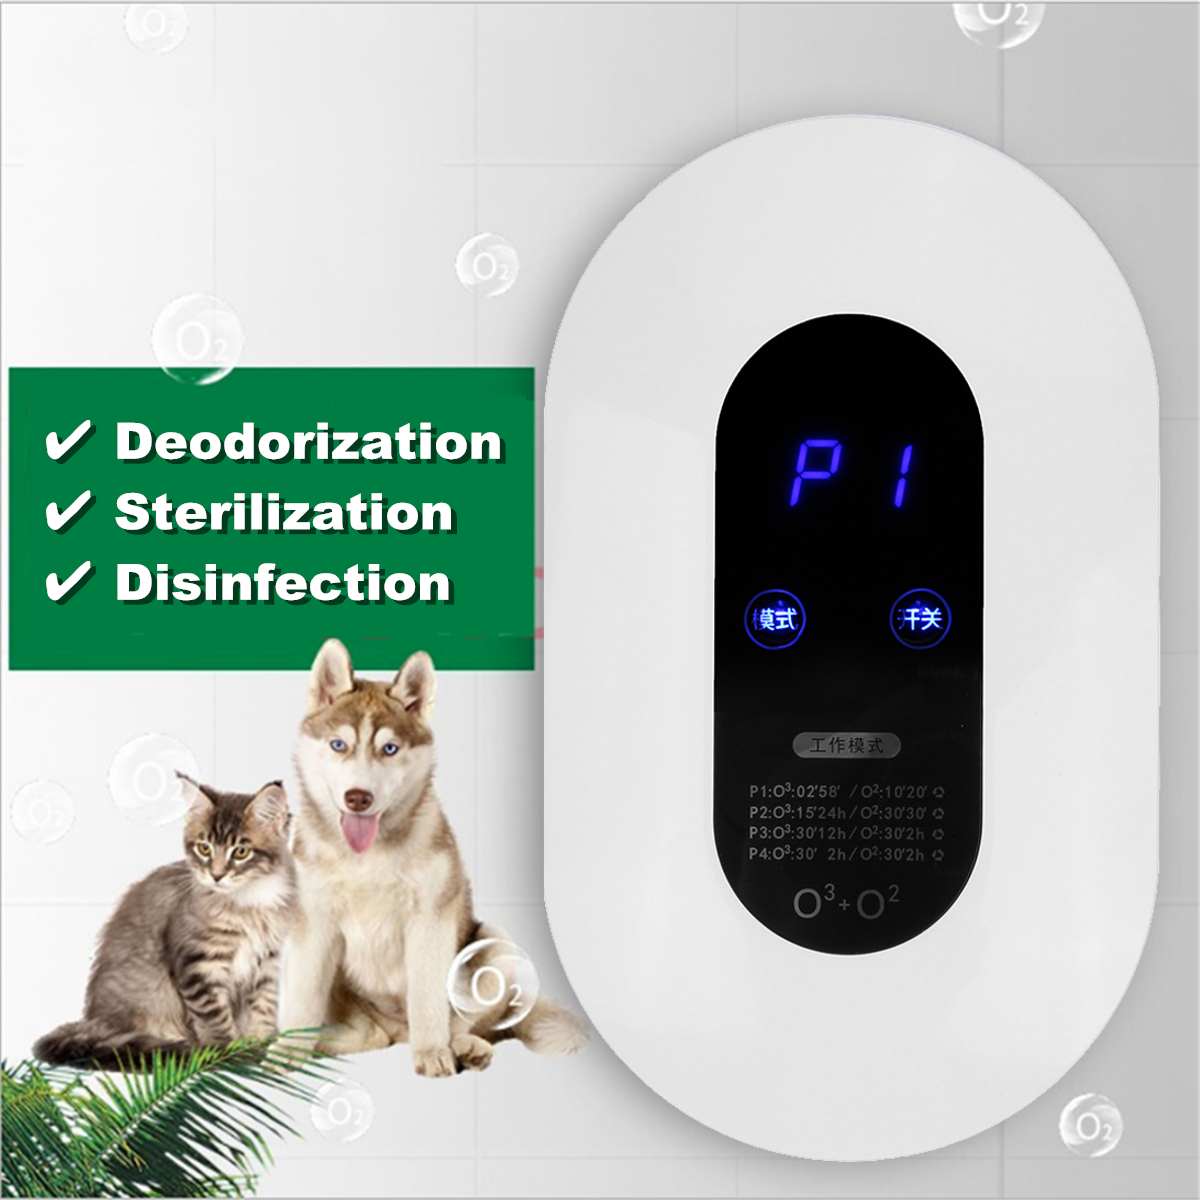 Bakeey-Smart-Air-Purifier-Disinfection-Formaldehyde-Smoke-Dust-Remove-Purification-Household-Office--1666139